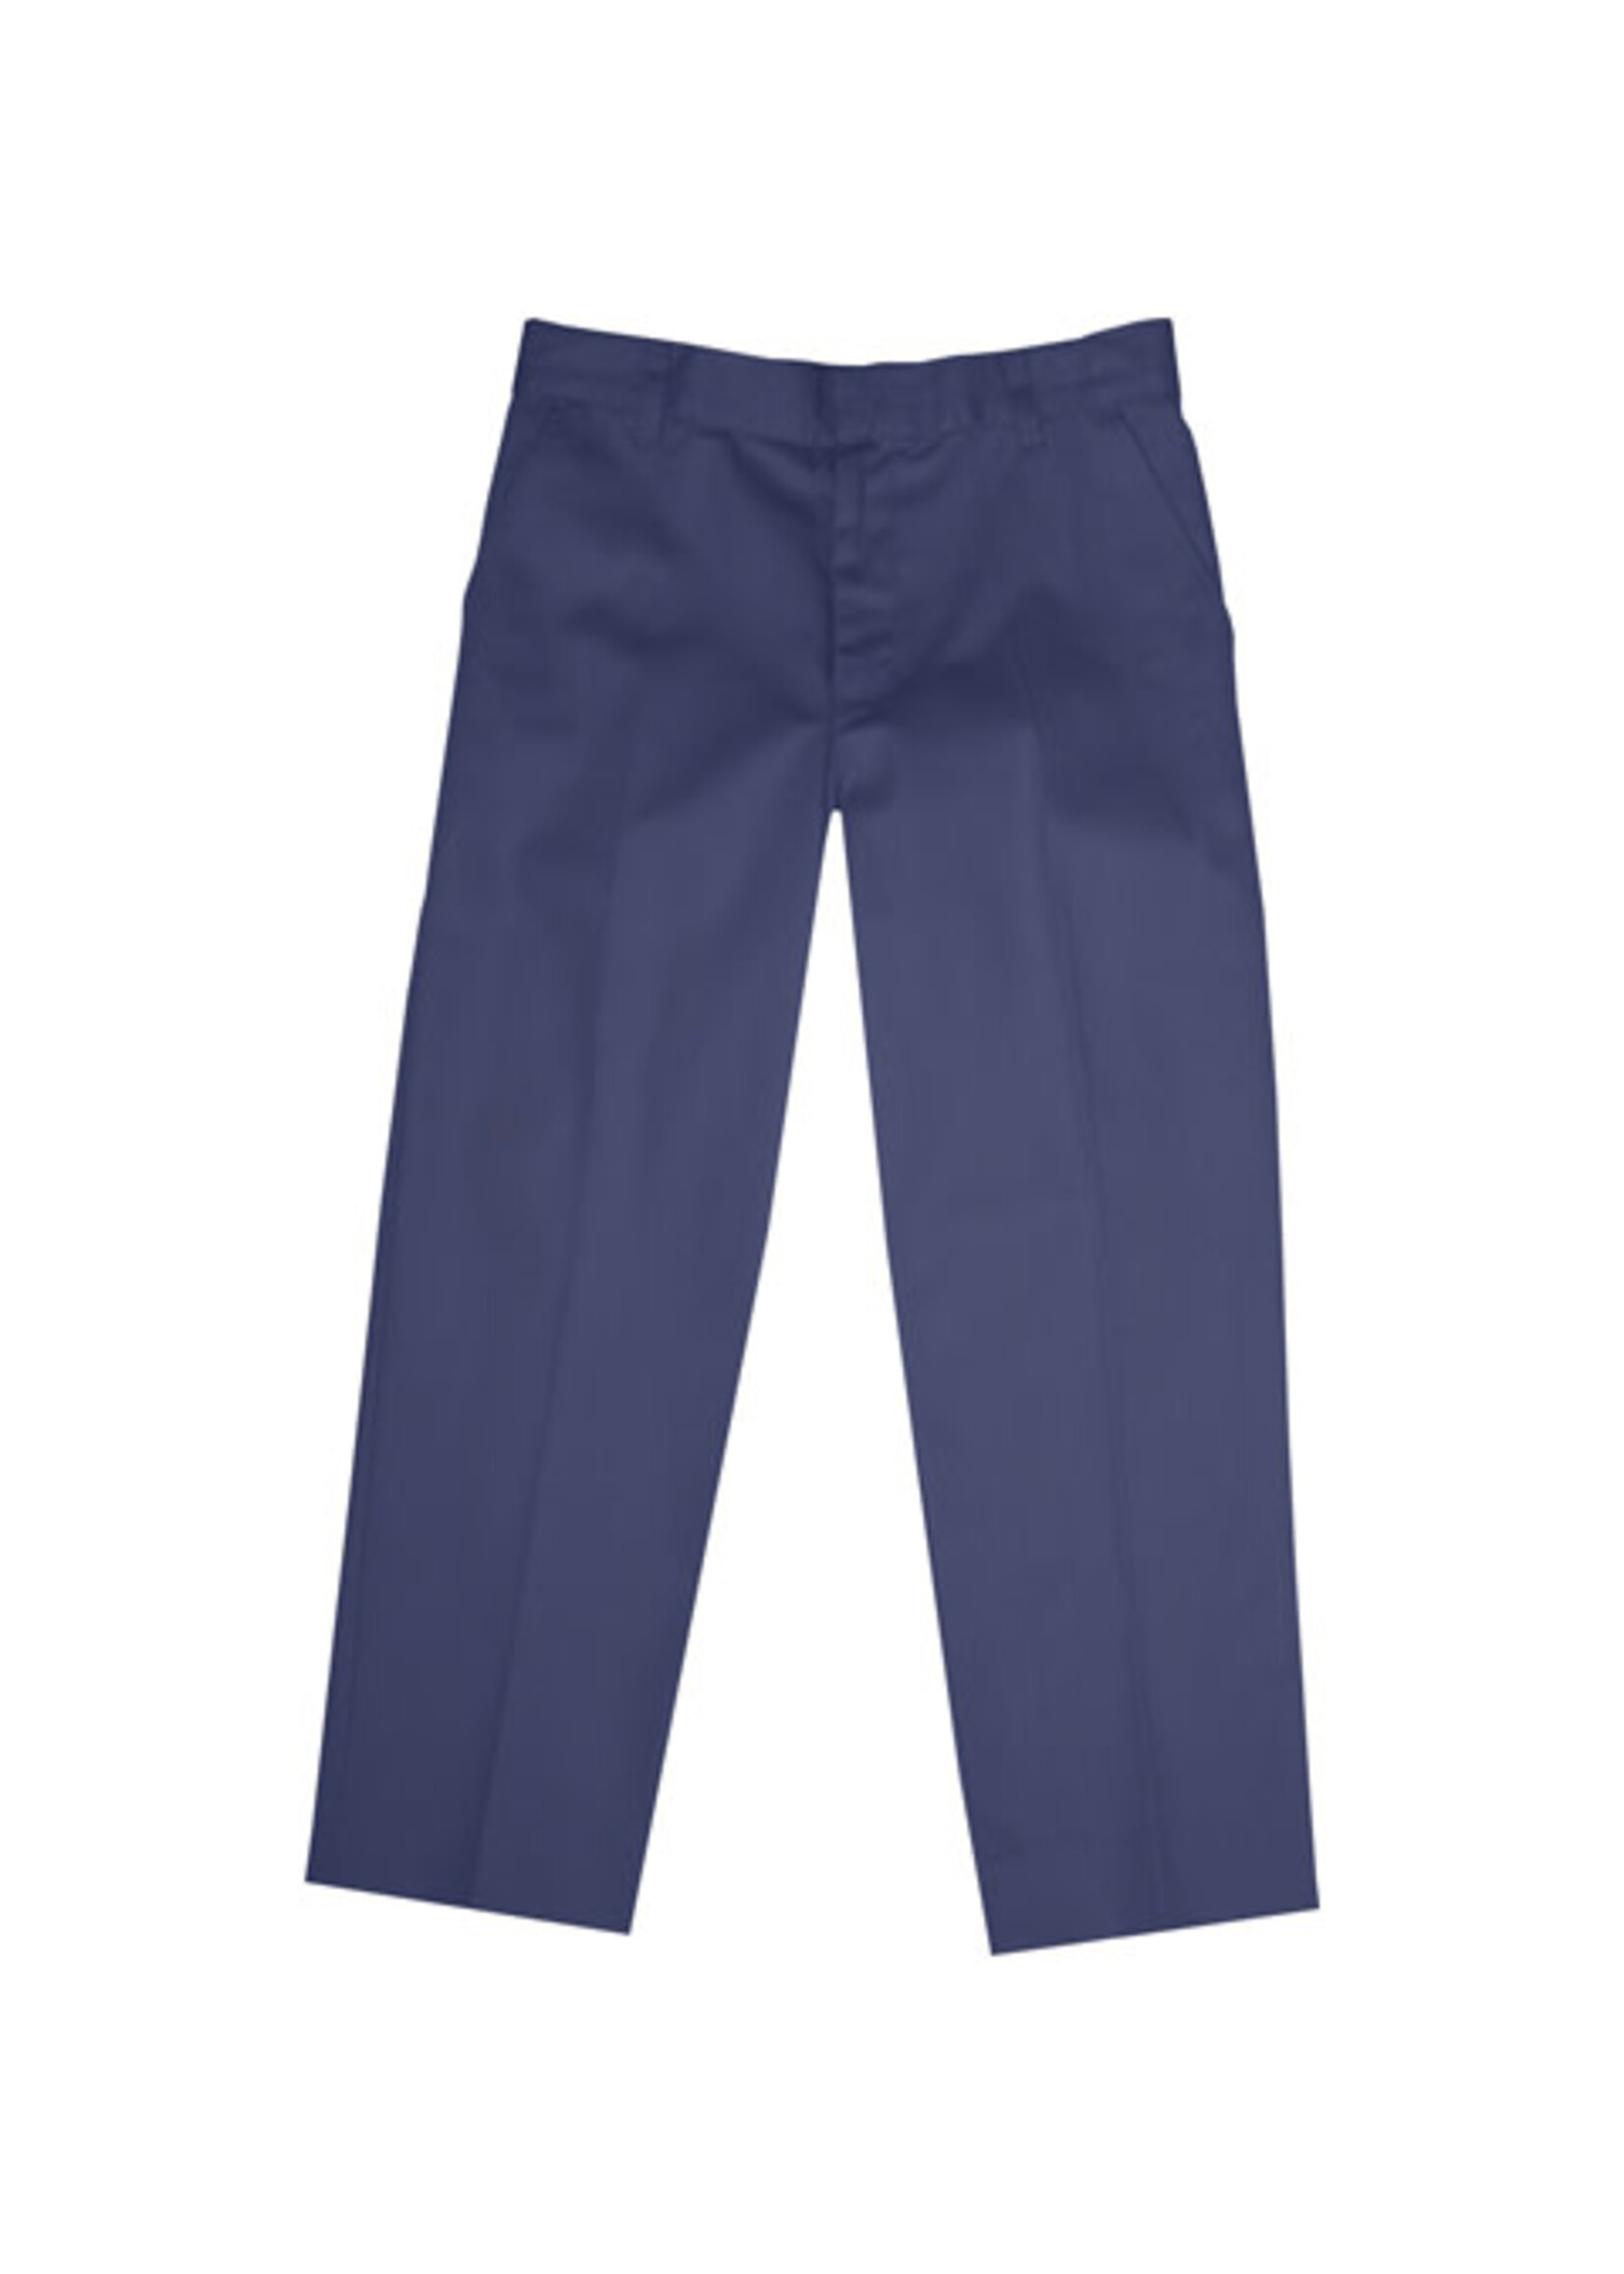 Buy Pants School Uniform for Boys/White/Navy Blue/Black/Grey/Red/Pink/Brown/Green/DAV/  (22, Navy Blue, 1) at Amazon.in